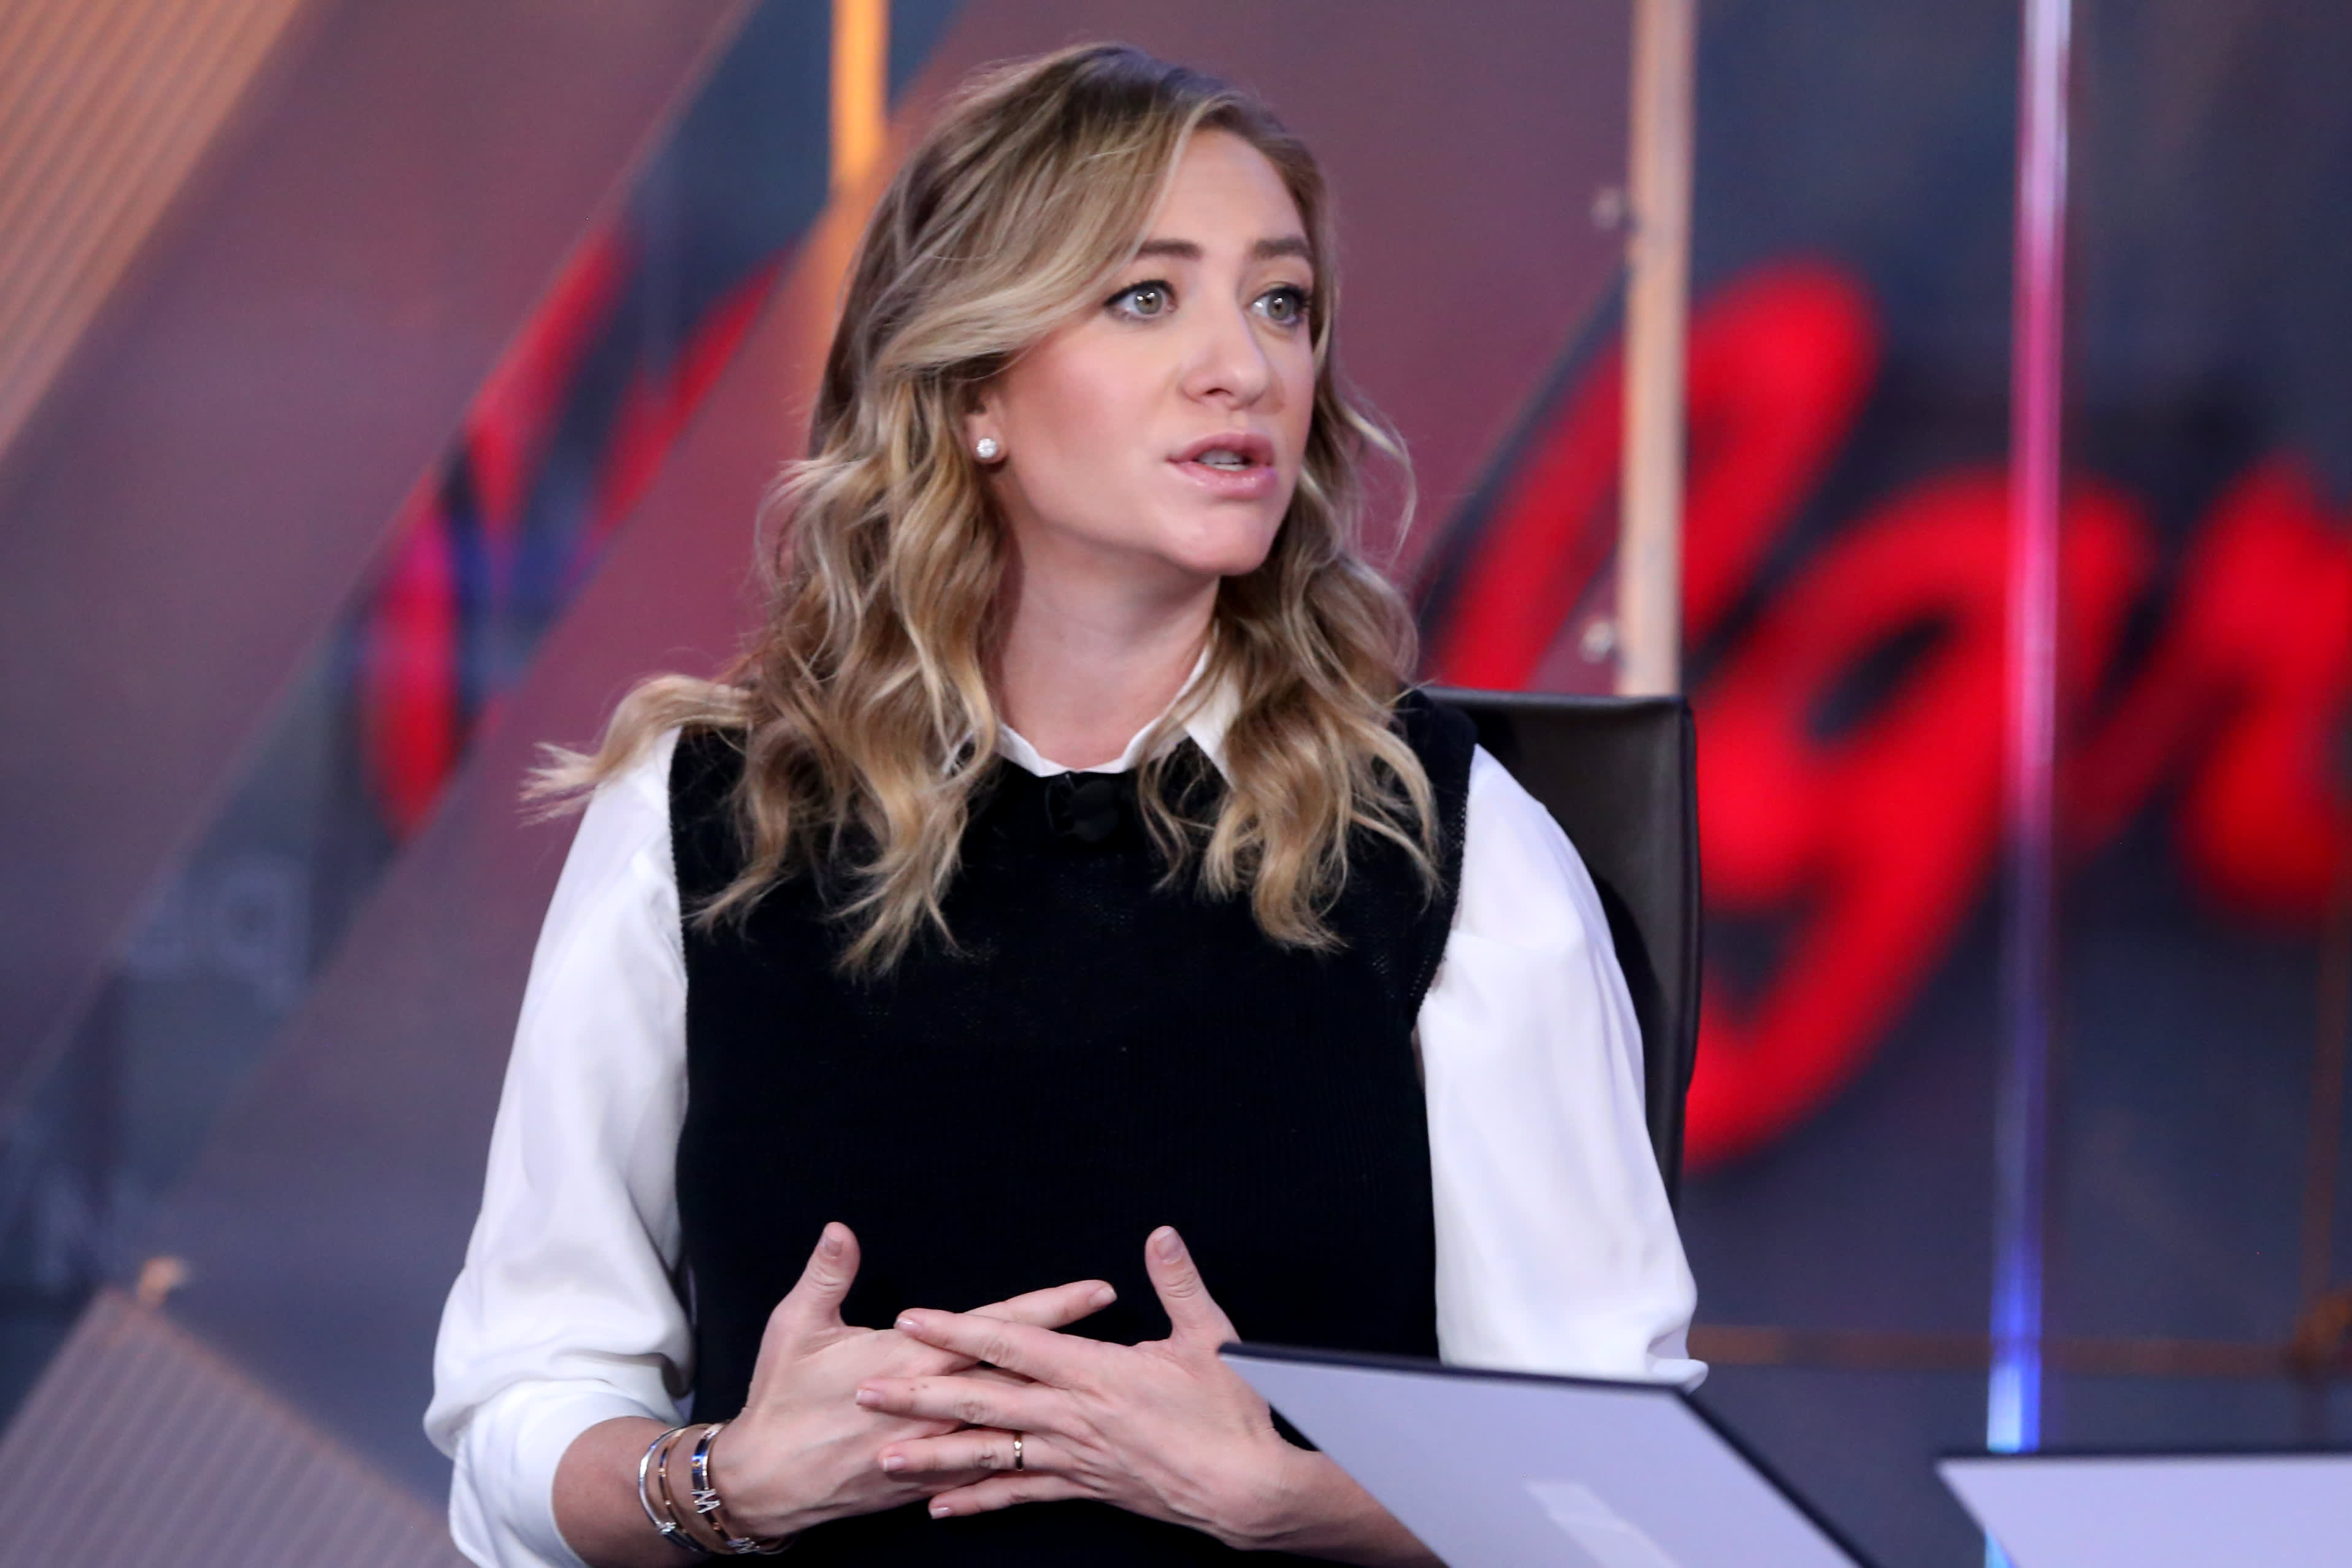 Bumble CEO Whitney Wolfe Herd, in a favorite quote from Jeff Bezos